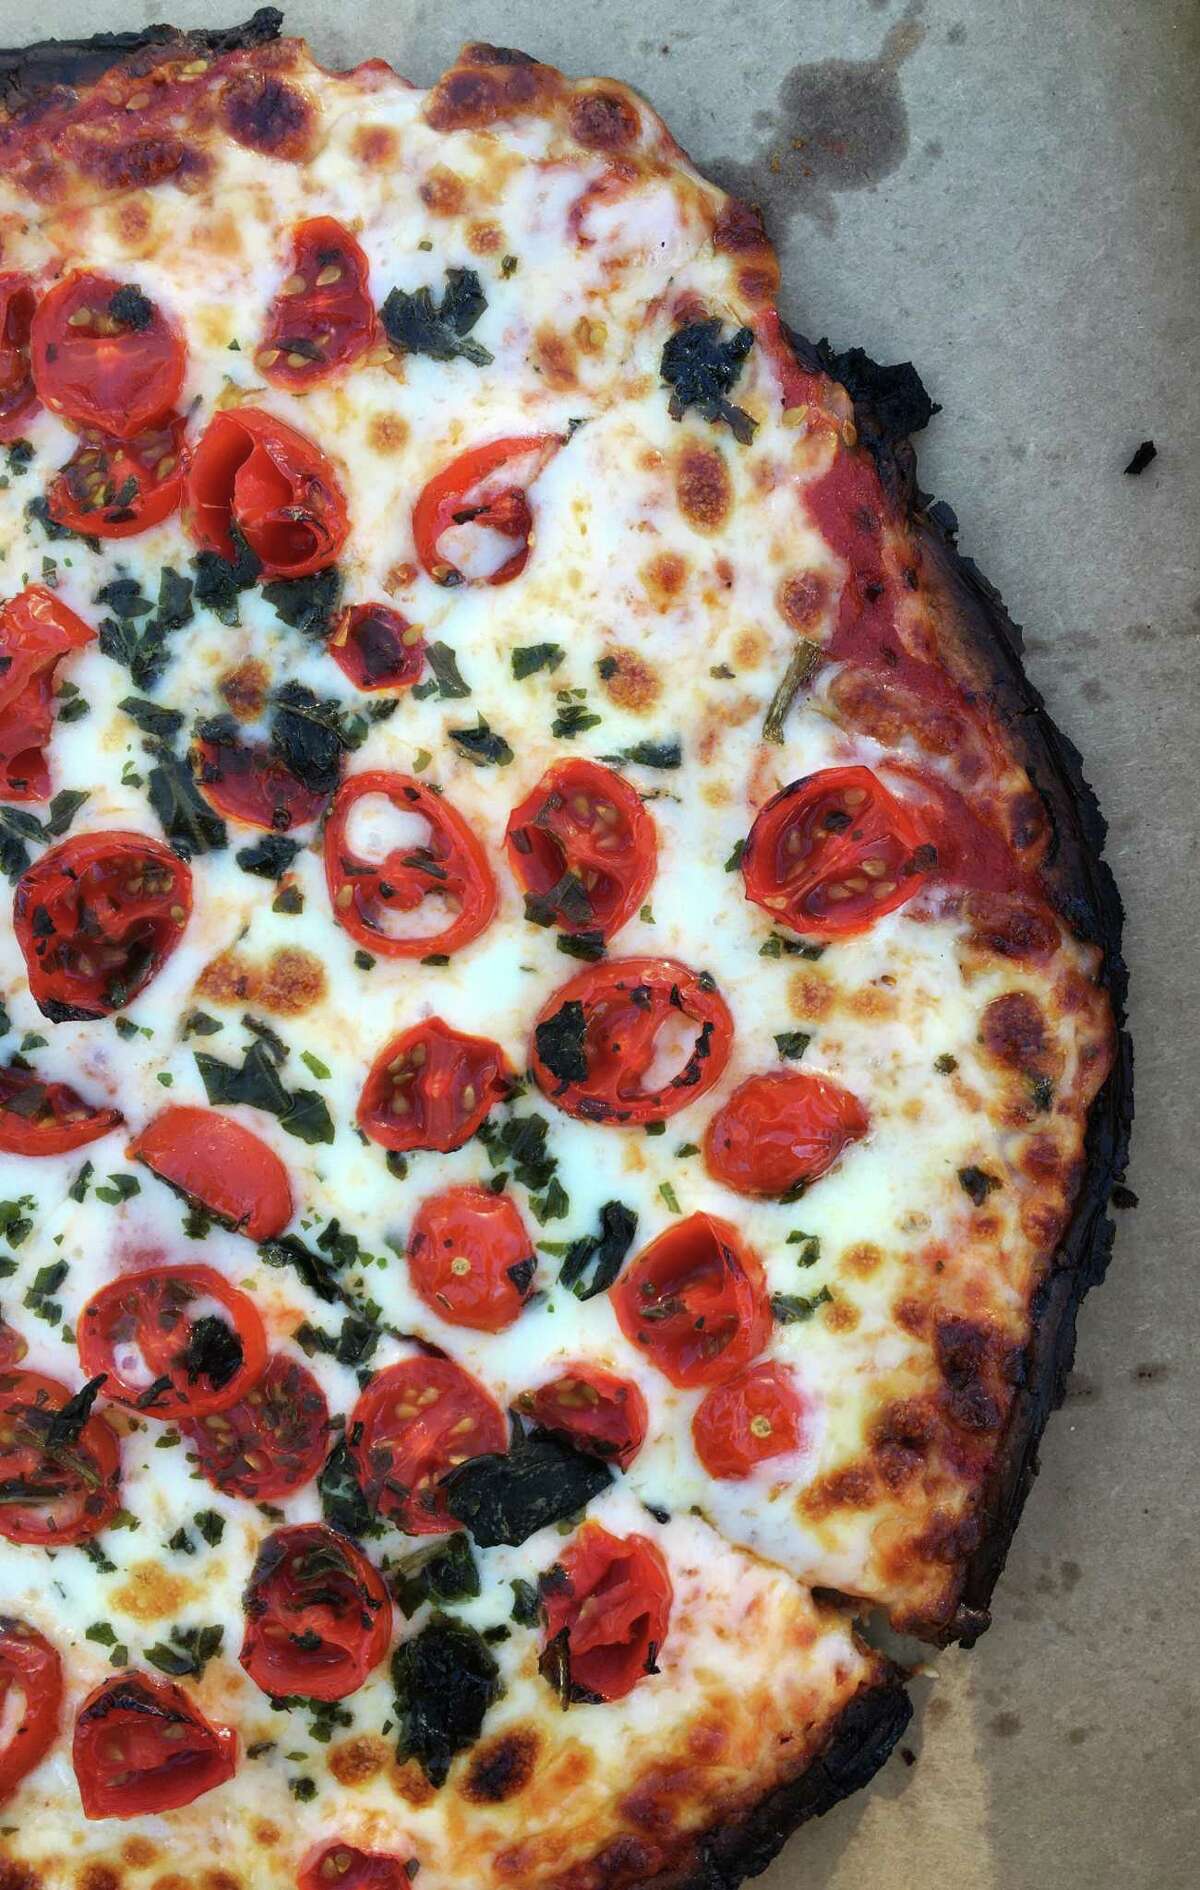 The Margherita pizza at Nico's Pizzeria is loaded with cherry tomatoes.